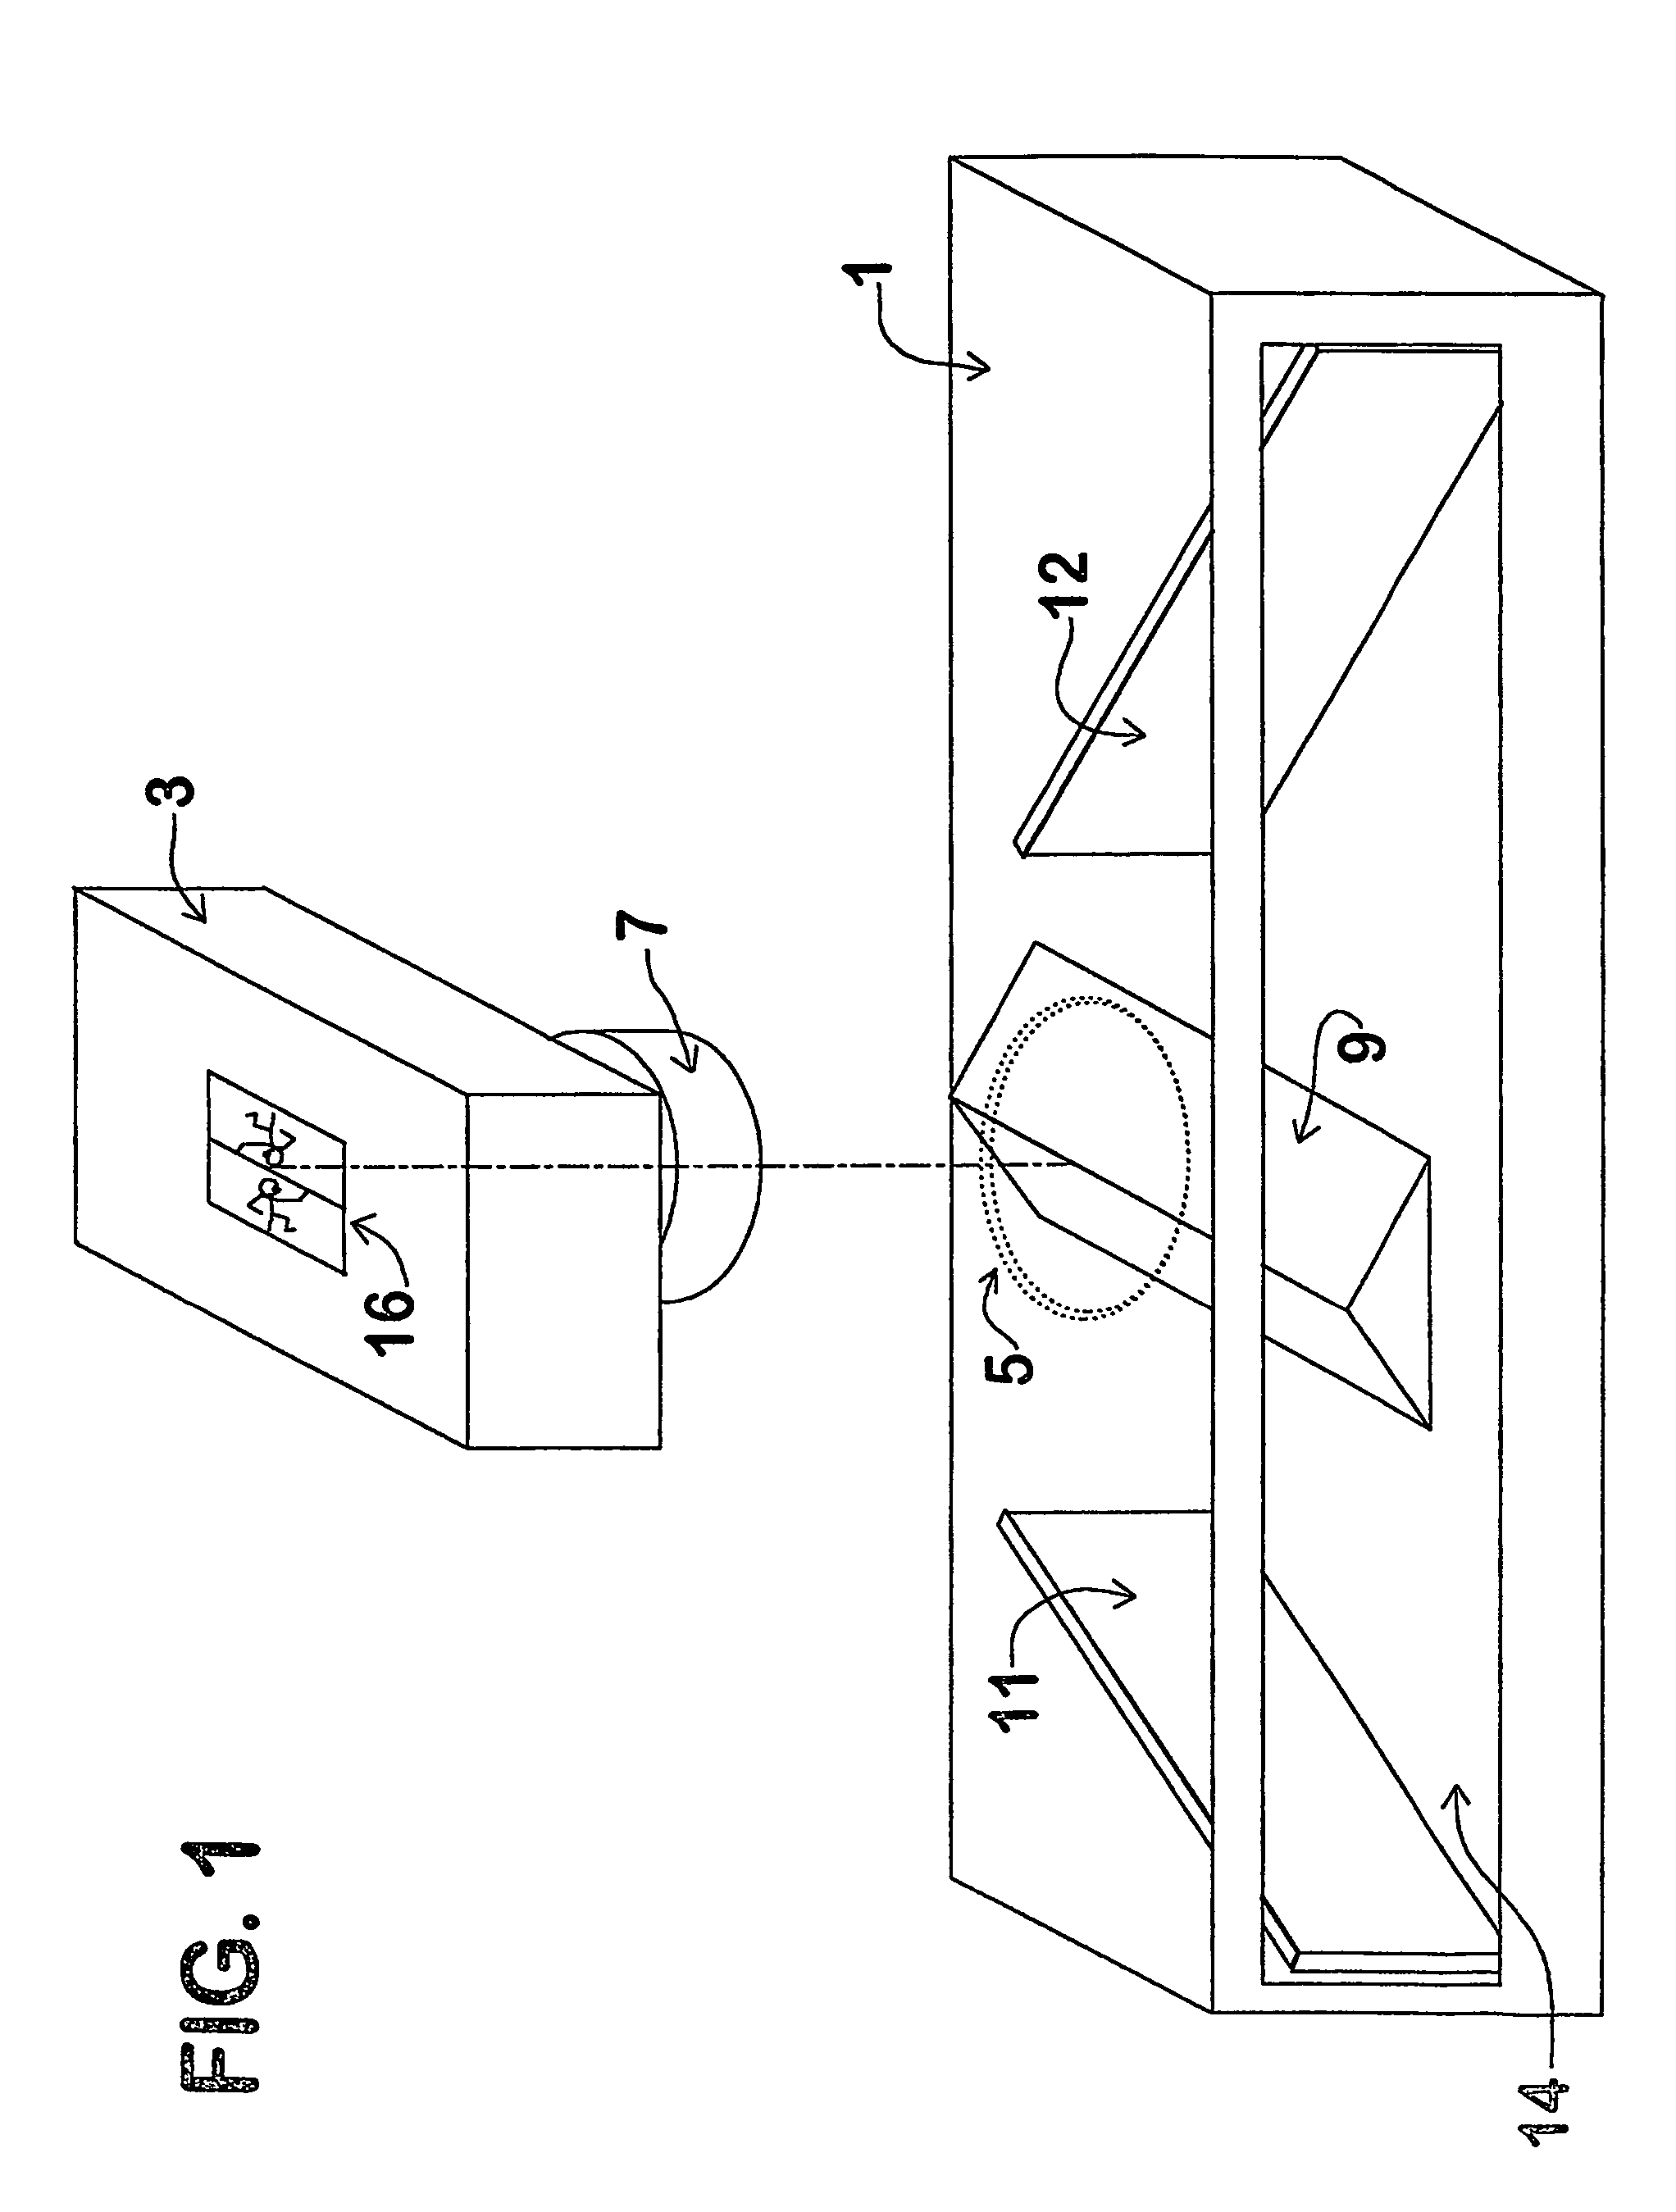 Apparatus for stereoscopic photography